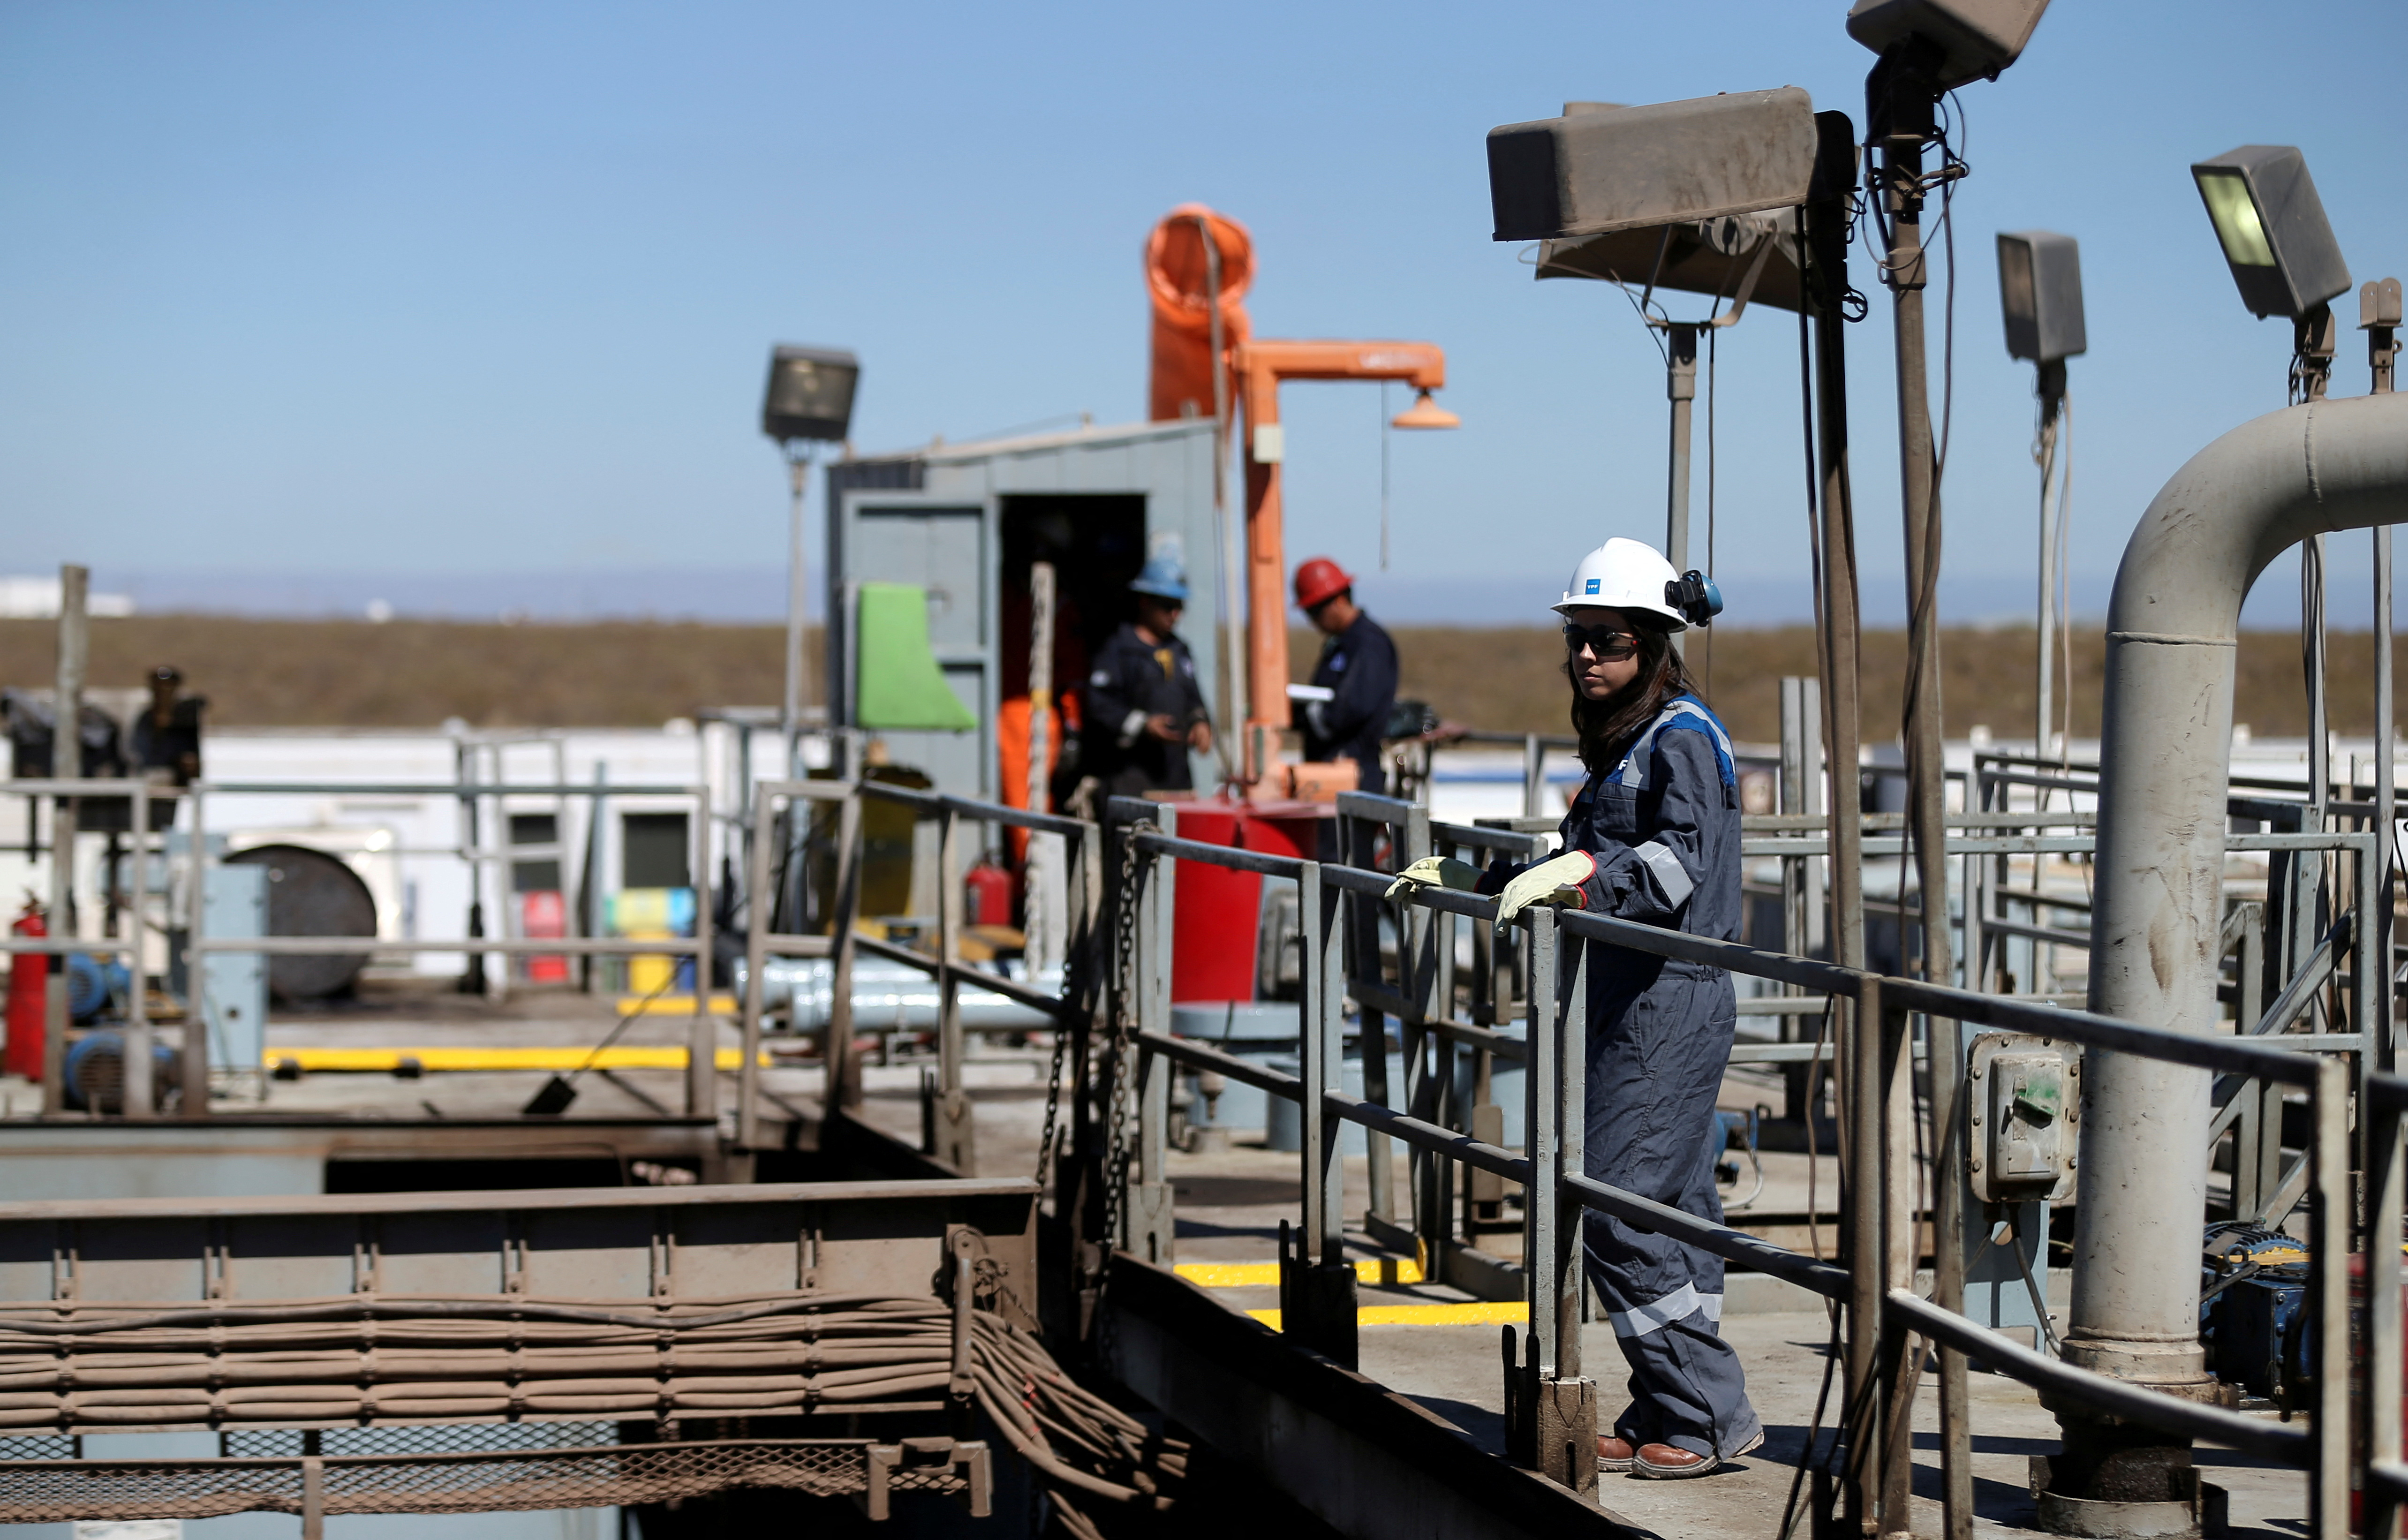 A worker looks on over a platform in a drilling rig at Vaca Muerta shale oil and gas drilling, in the Patagonian province of Neuquen